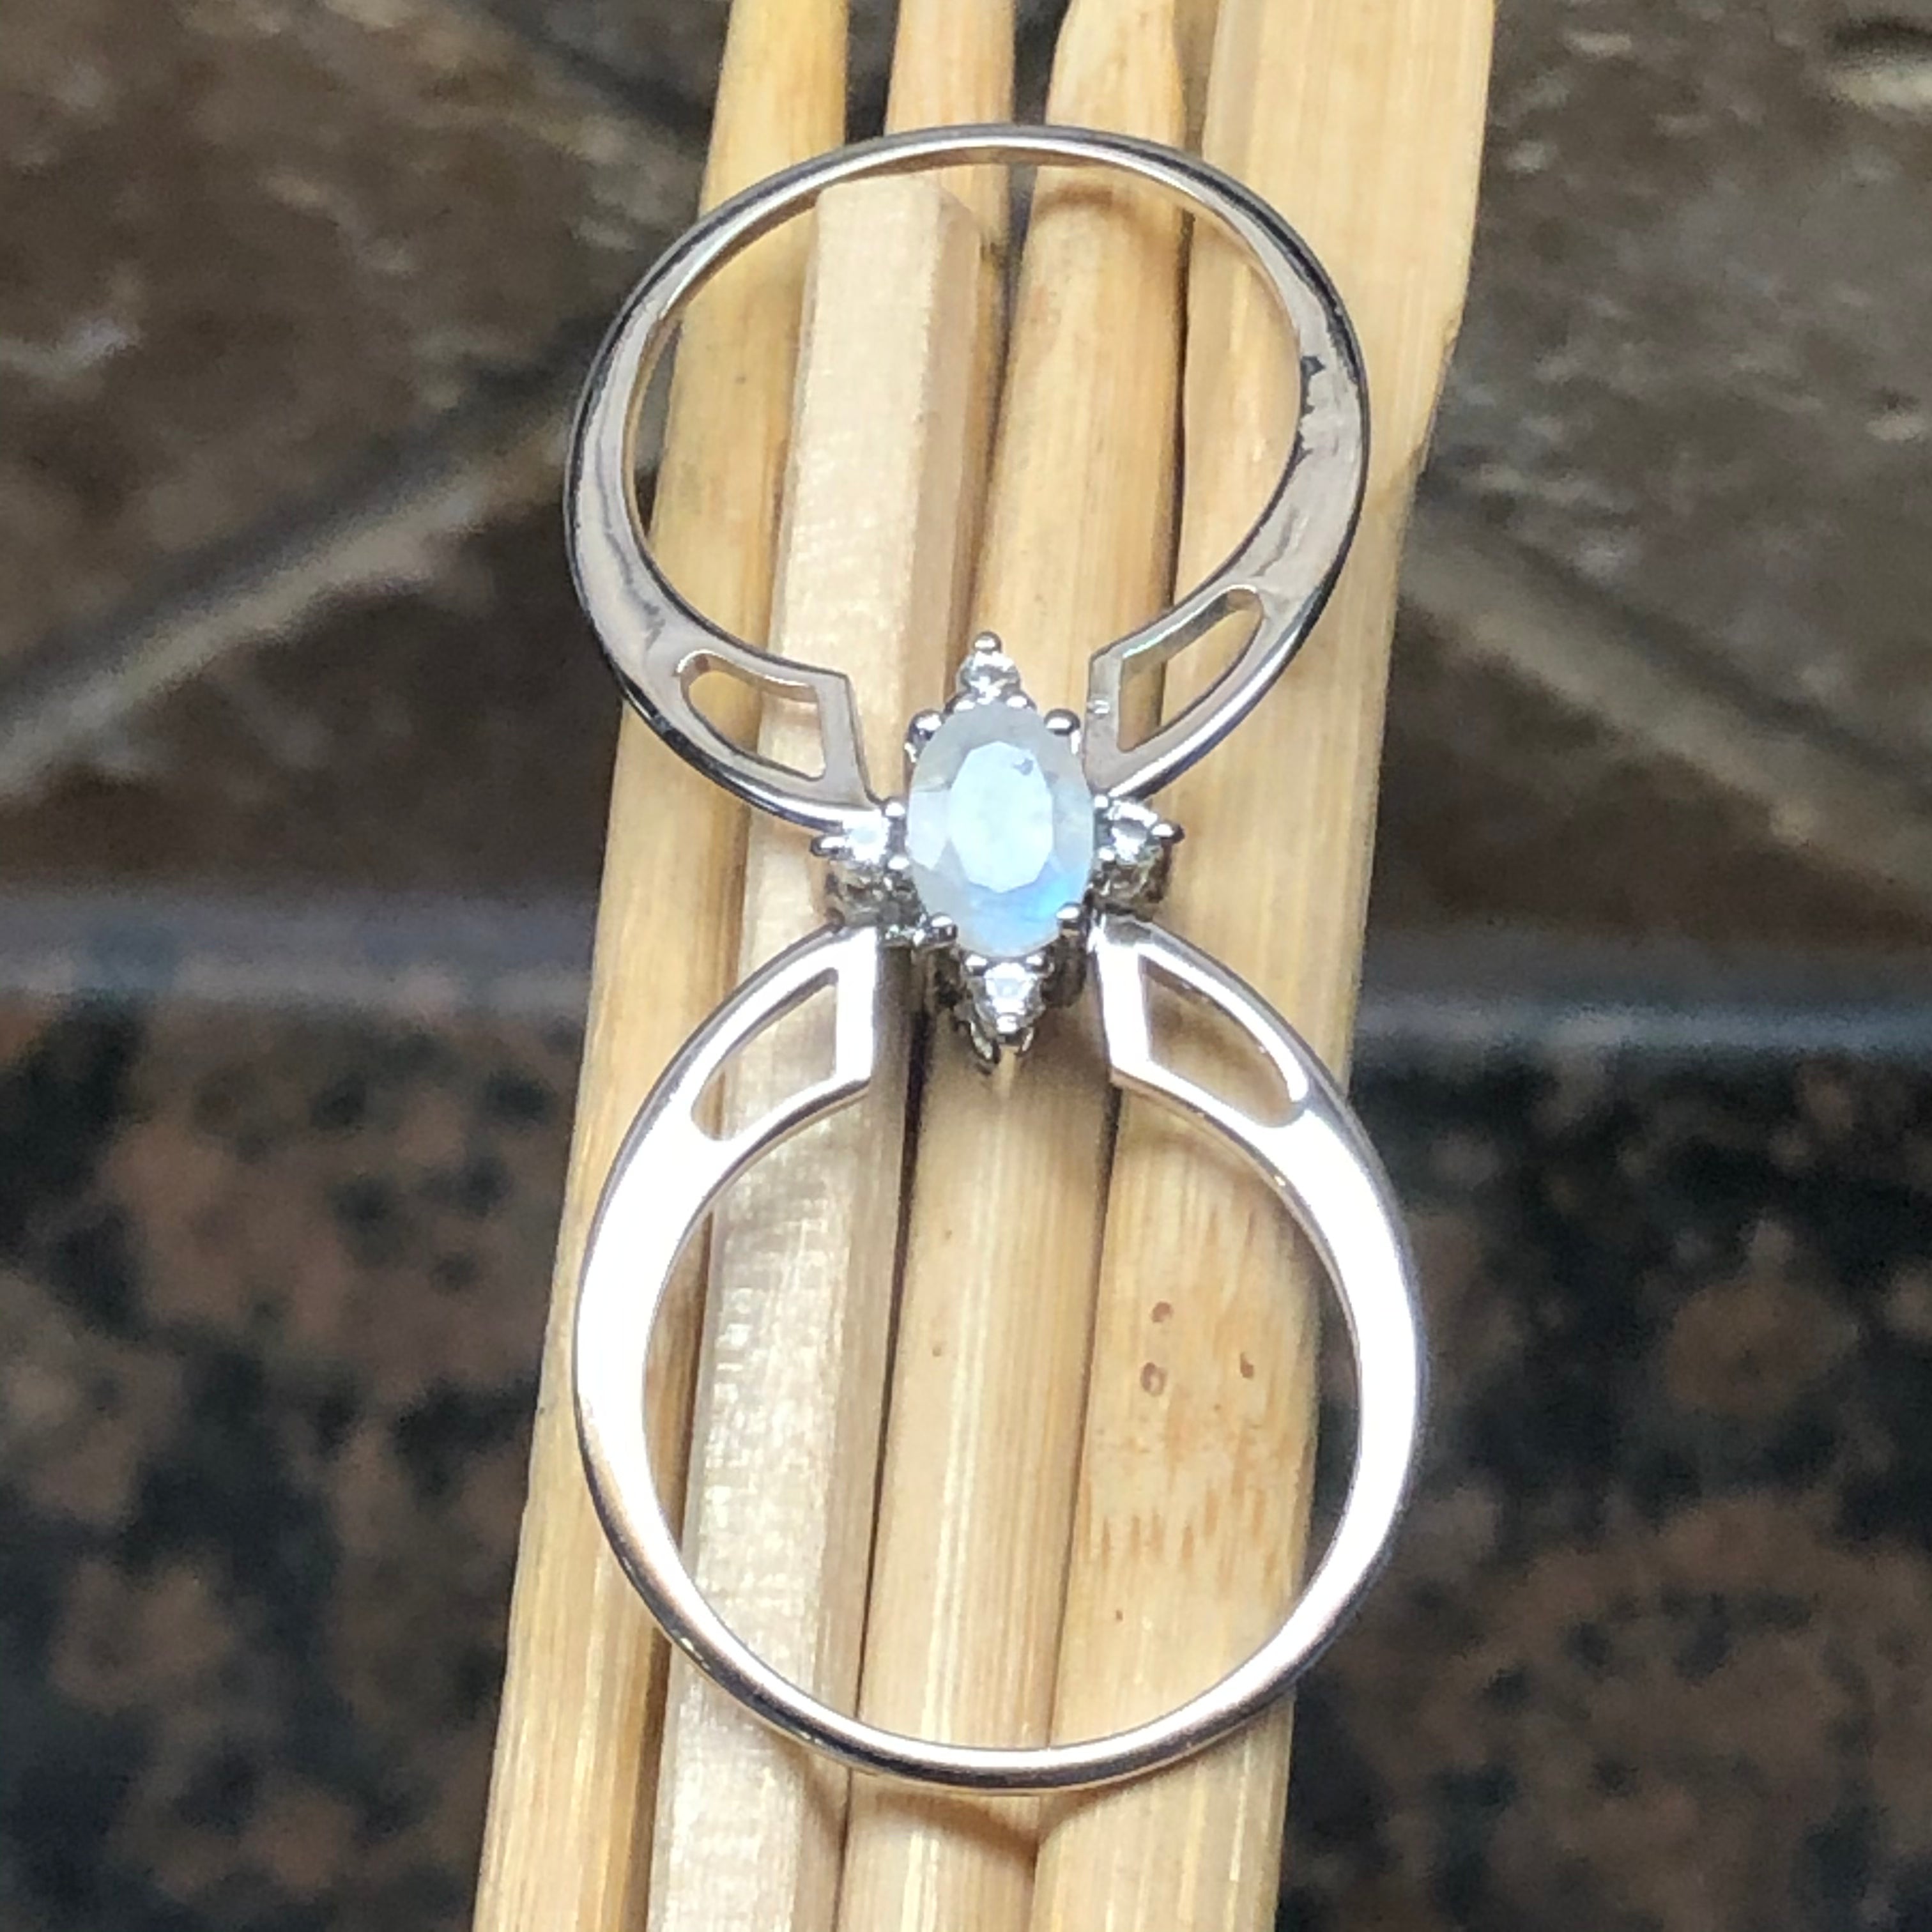 Genuine London Blue Topaz, Rainbow Moonstone 925 Solid Sterling Silver Engagement Ring Size 6, 7, 8, 9 - Natural Rocks by Kala